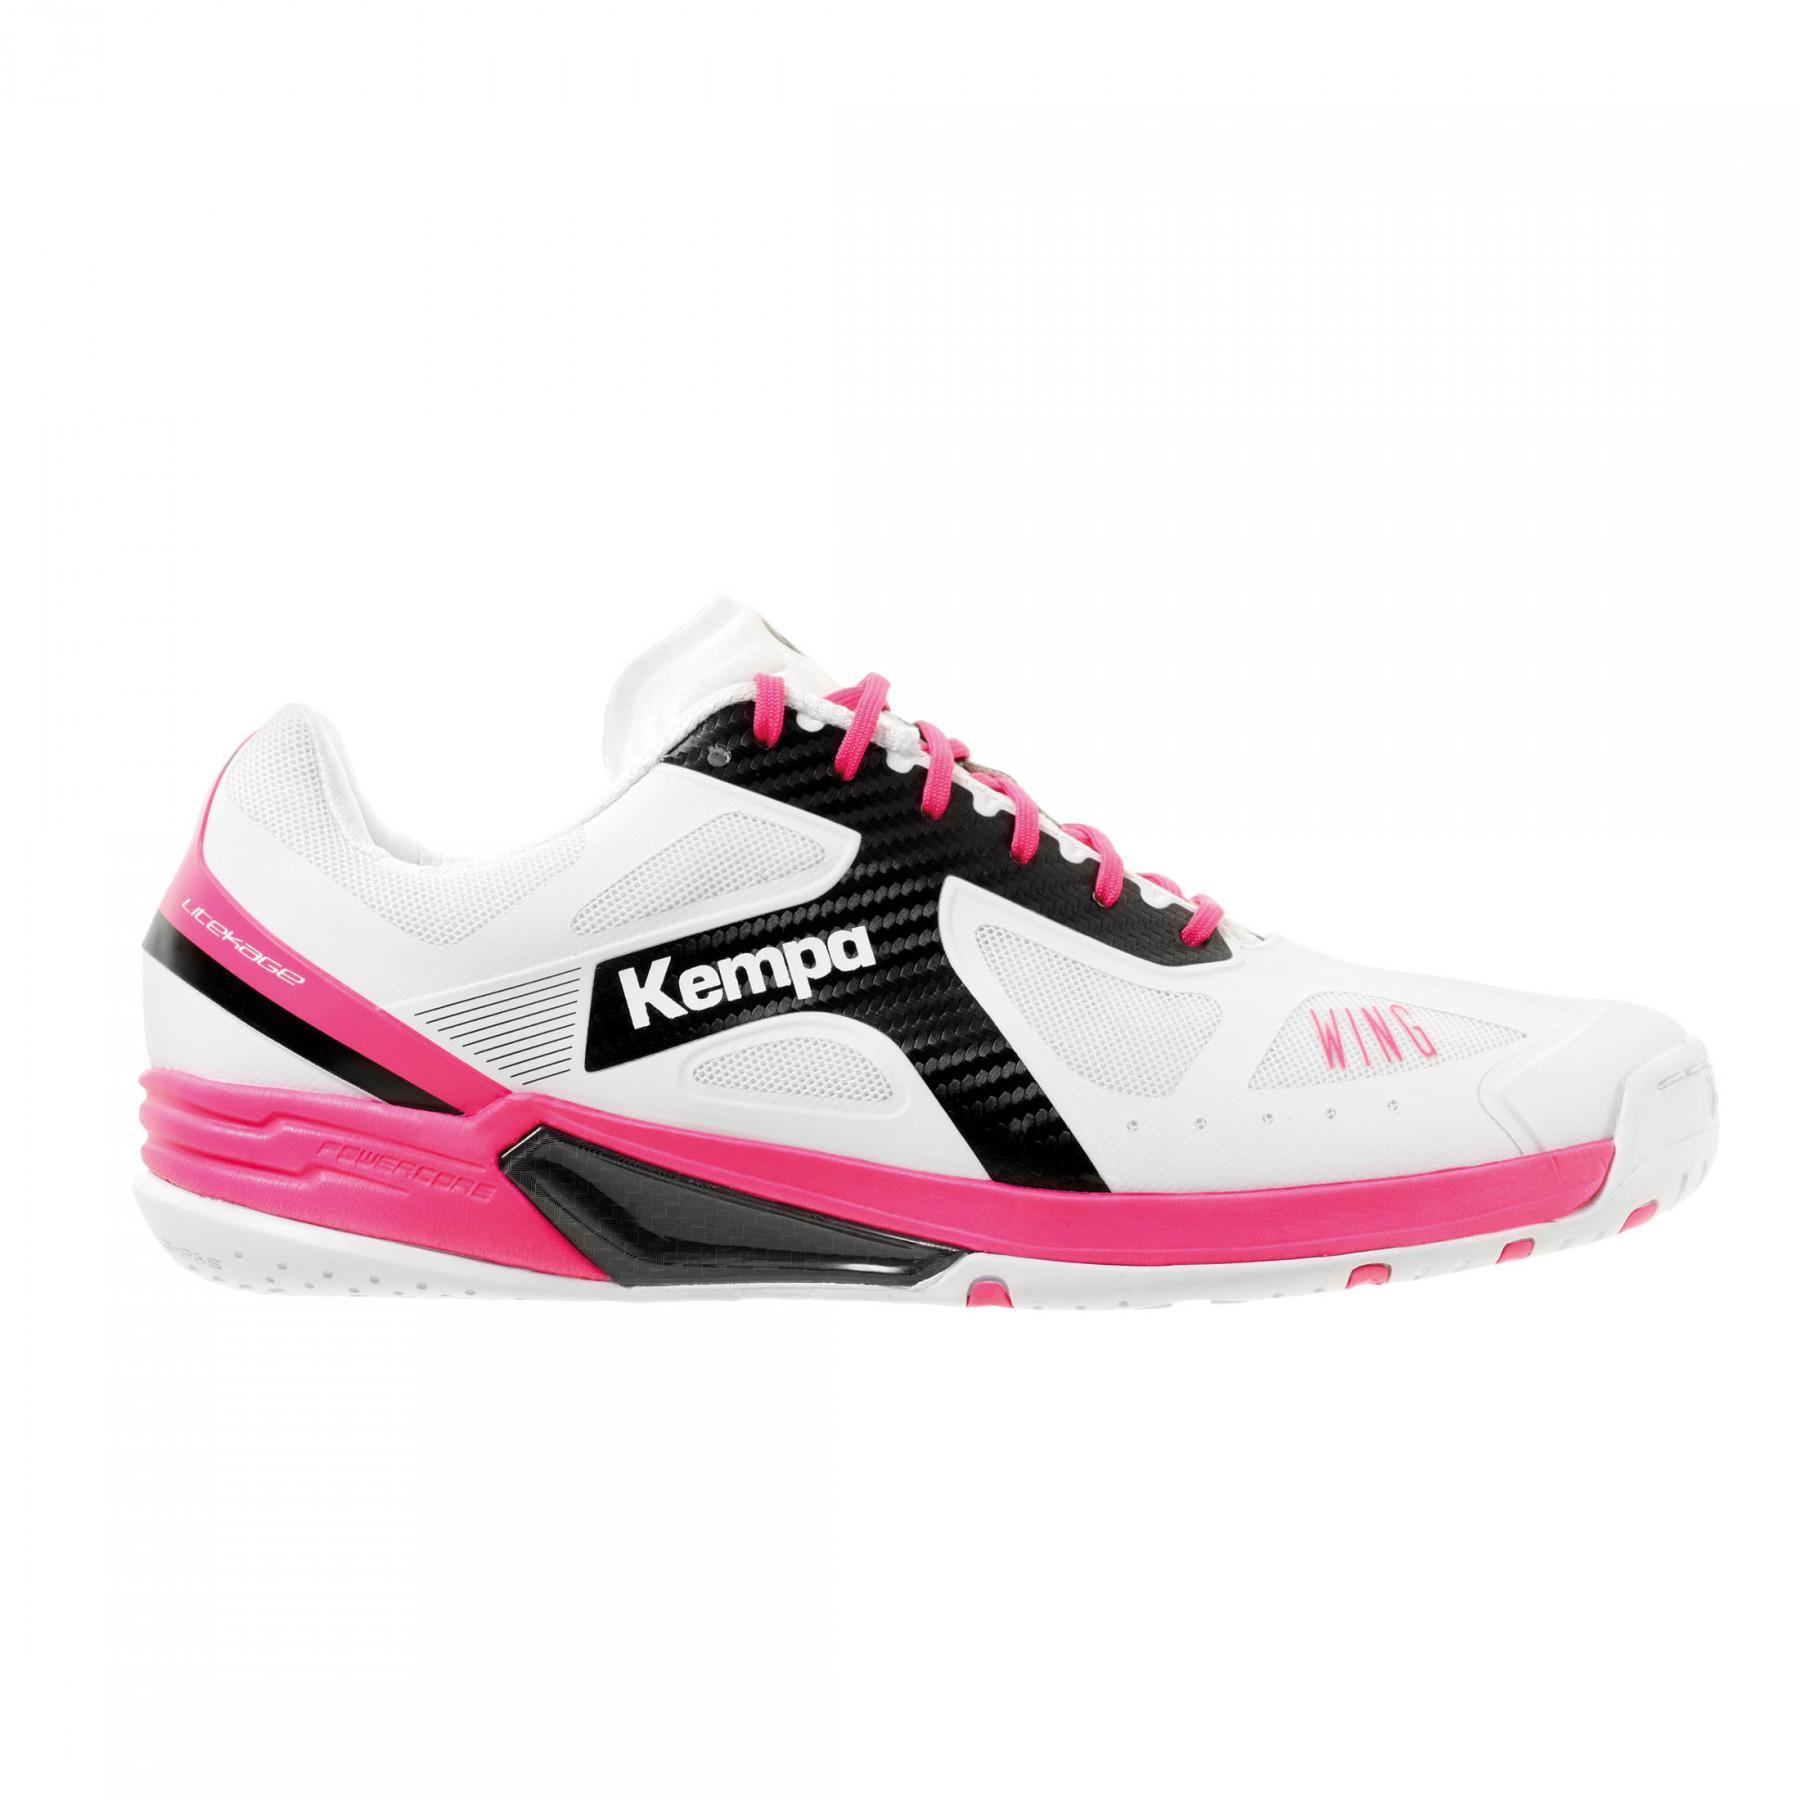 Chaussures femme Kempa Wing lite